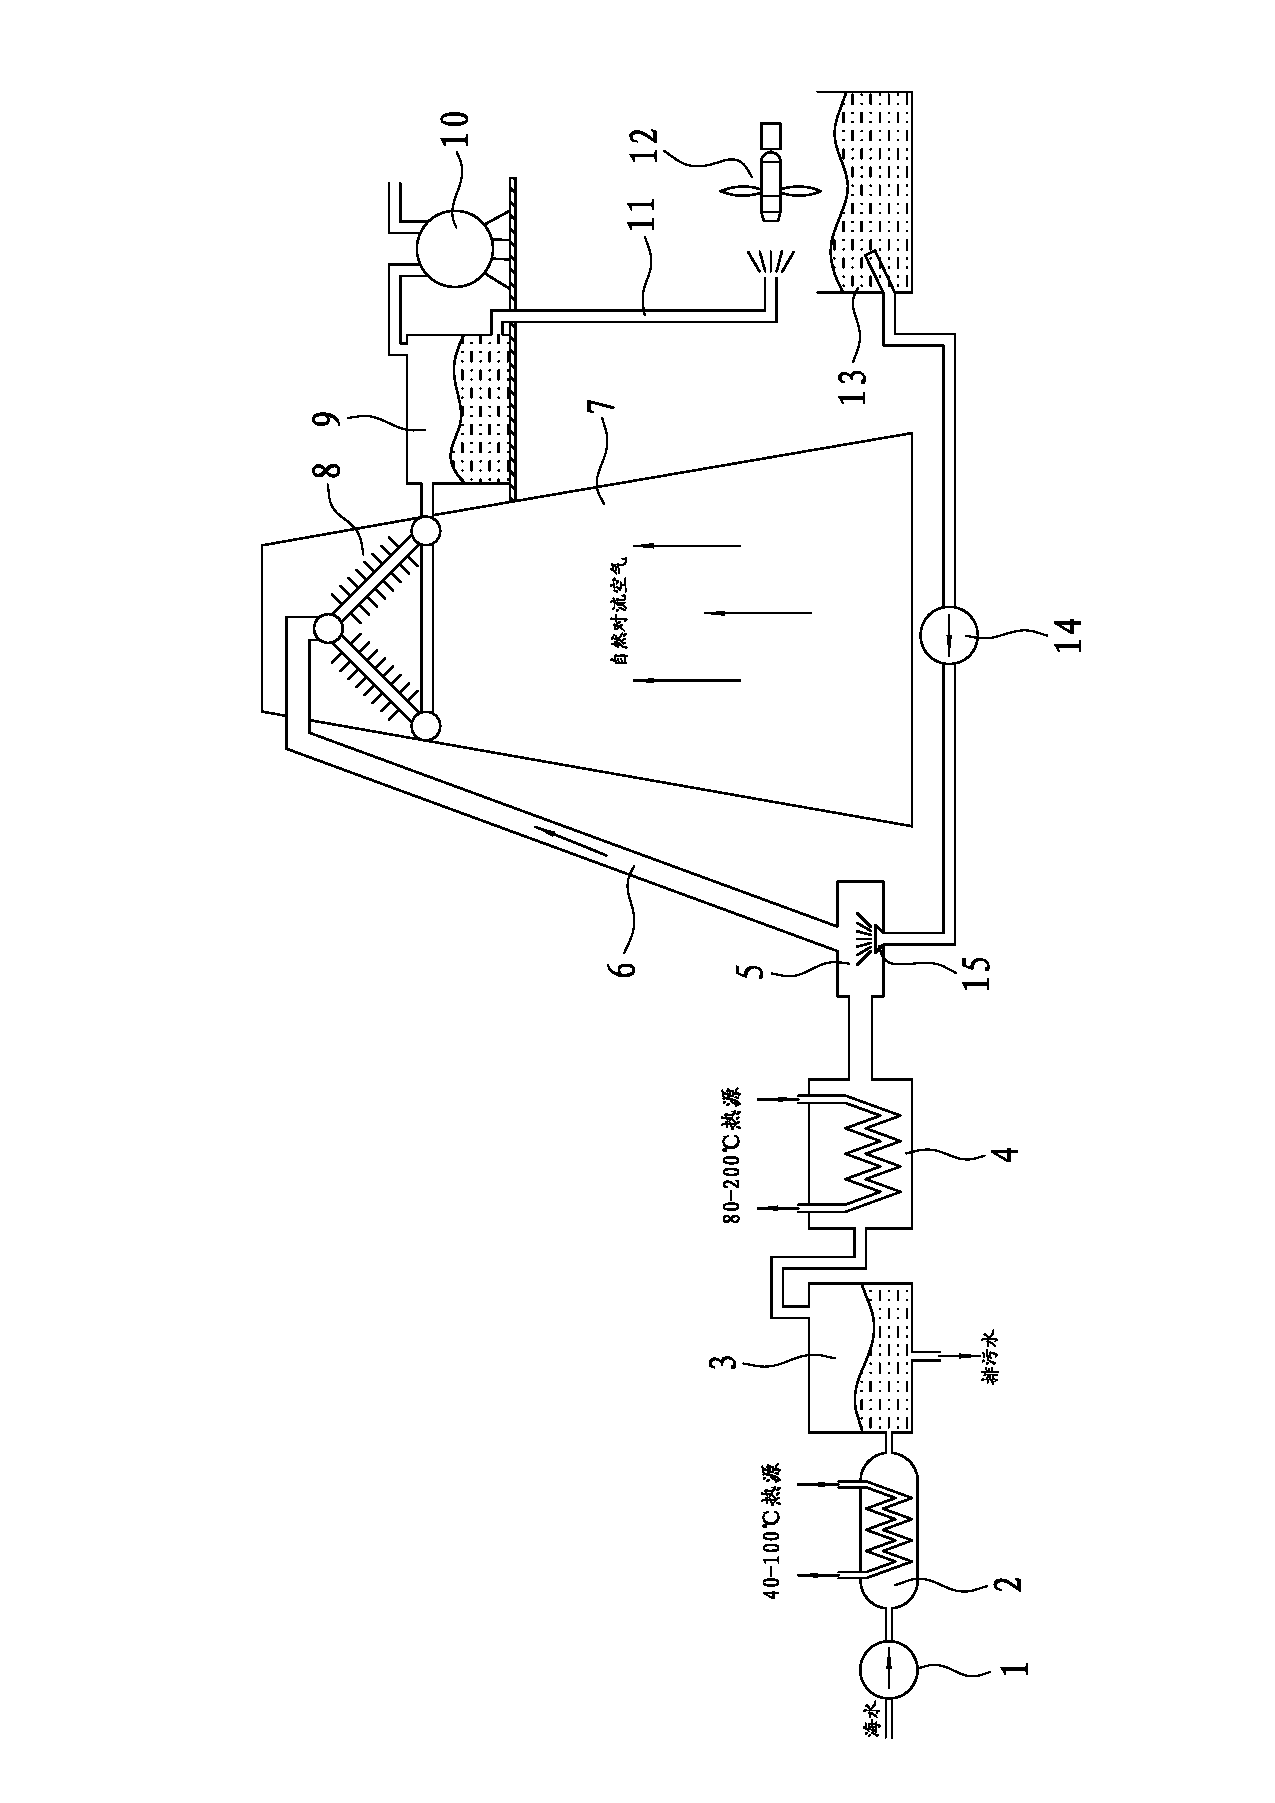 Method and equipment for generating electricity and preparing fresh water by use of low-temperature heat source